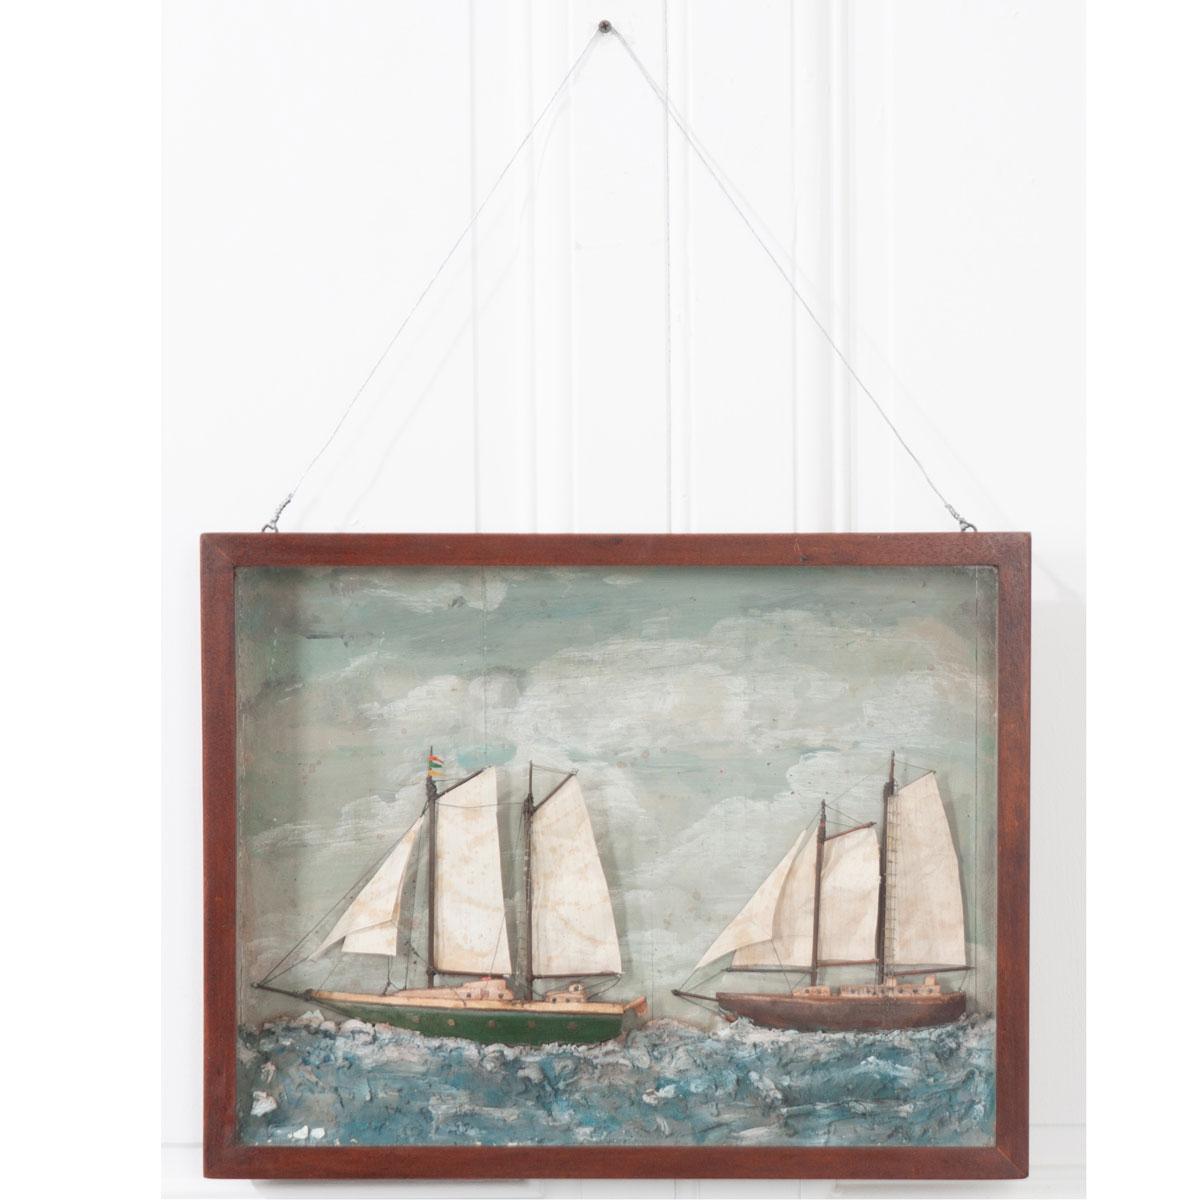 A brilliant English, 20th century nautically themed diorama featuring two schooners in a stained wood, framed box, c. 1920. These three-dimensional works of art were typically made by sailors. Note the meticulously detailed sails, masts, ropes,